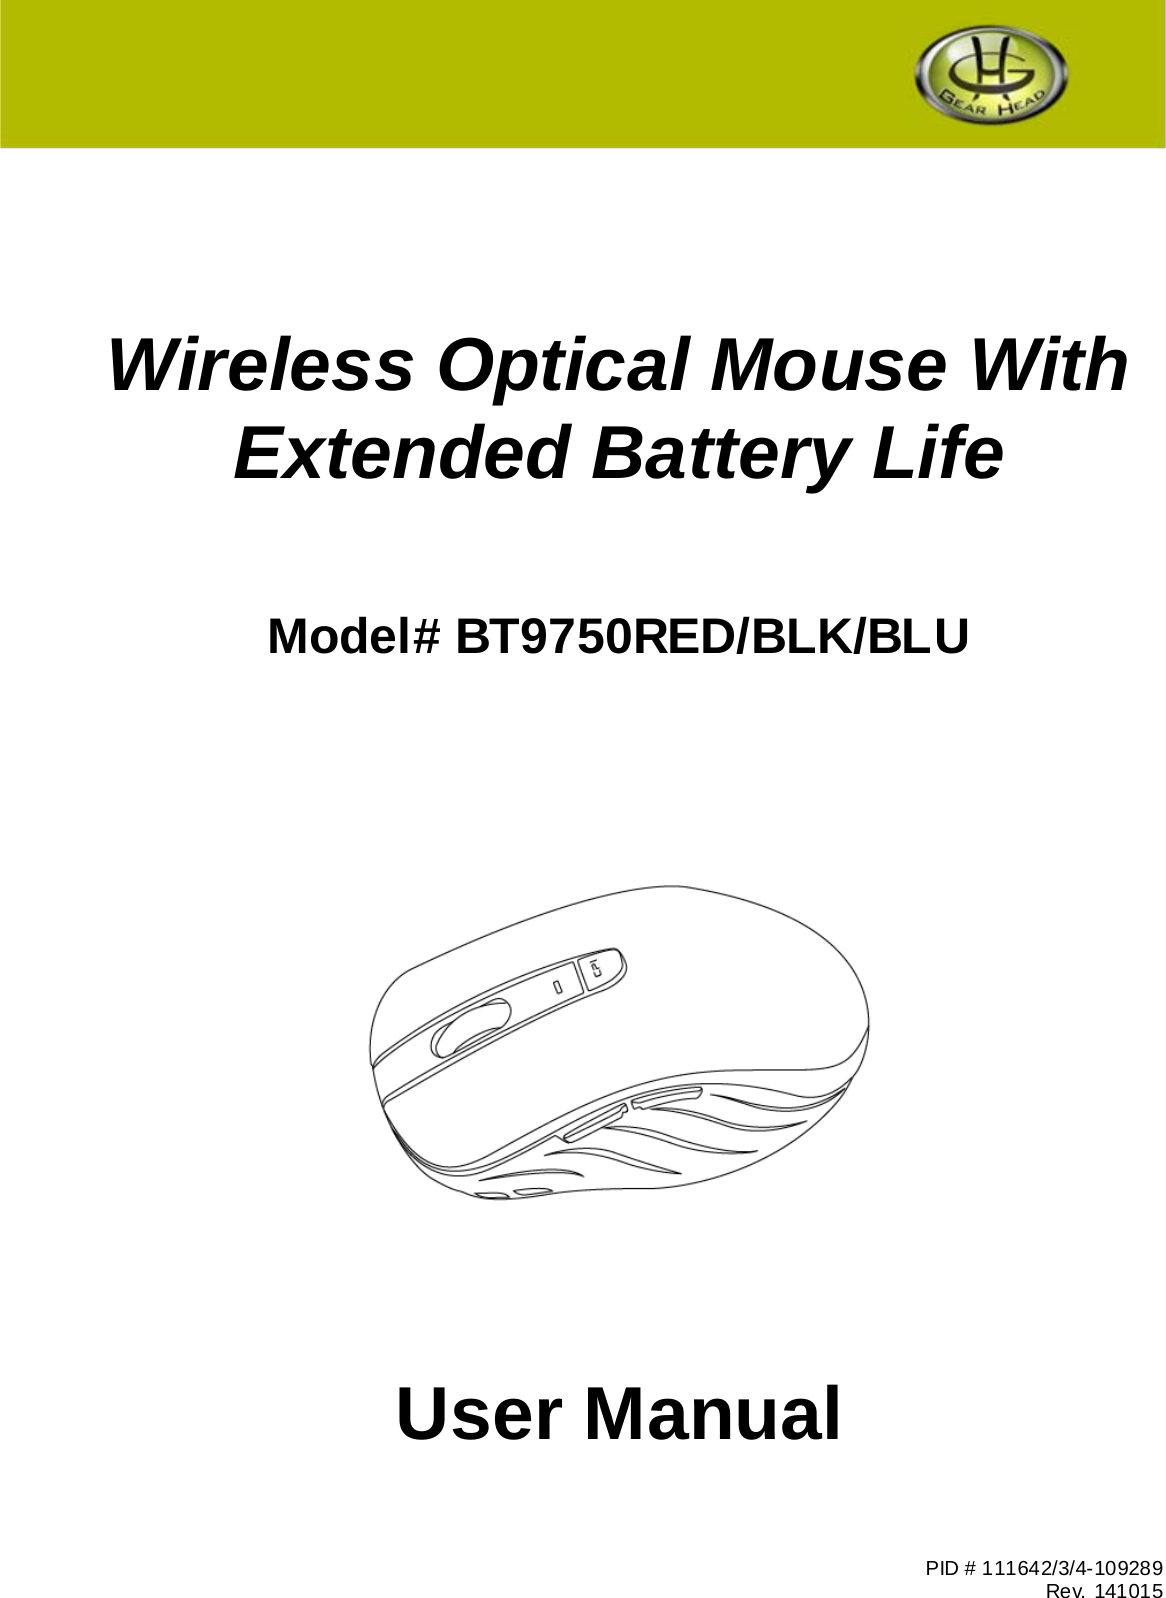       Wireless Optical Mouse With Extended Battery Life   Model# BT9750RED/BLK/BLU            User Manual    PID # 111642/3/4-109289 Rev. 141015 